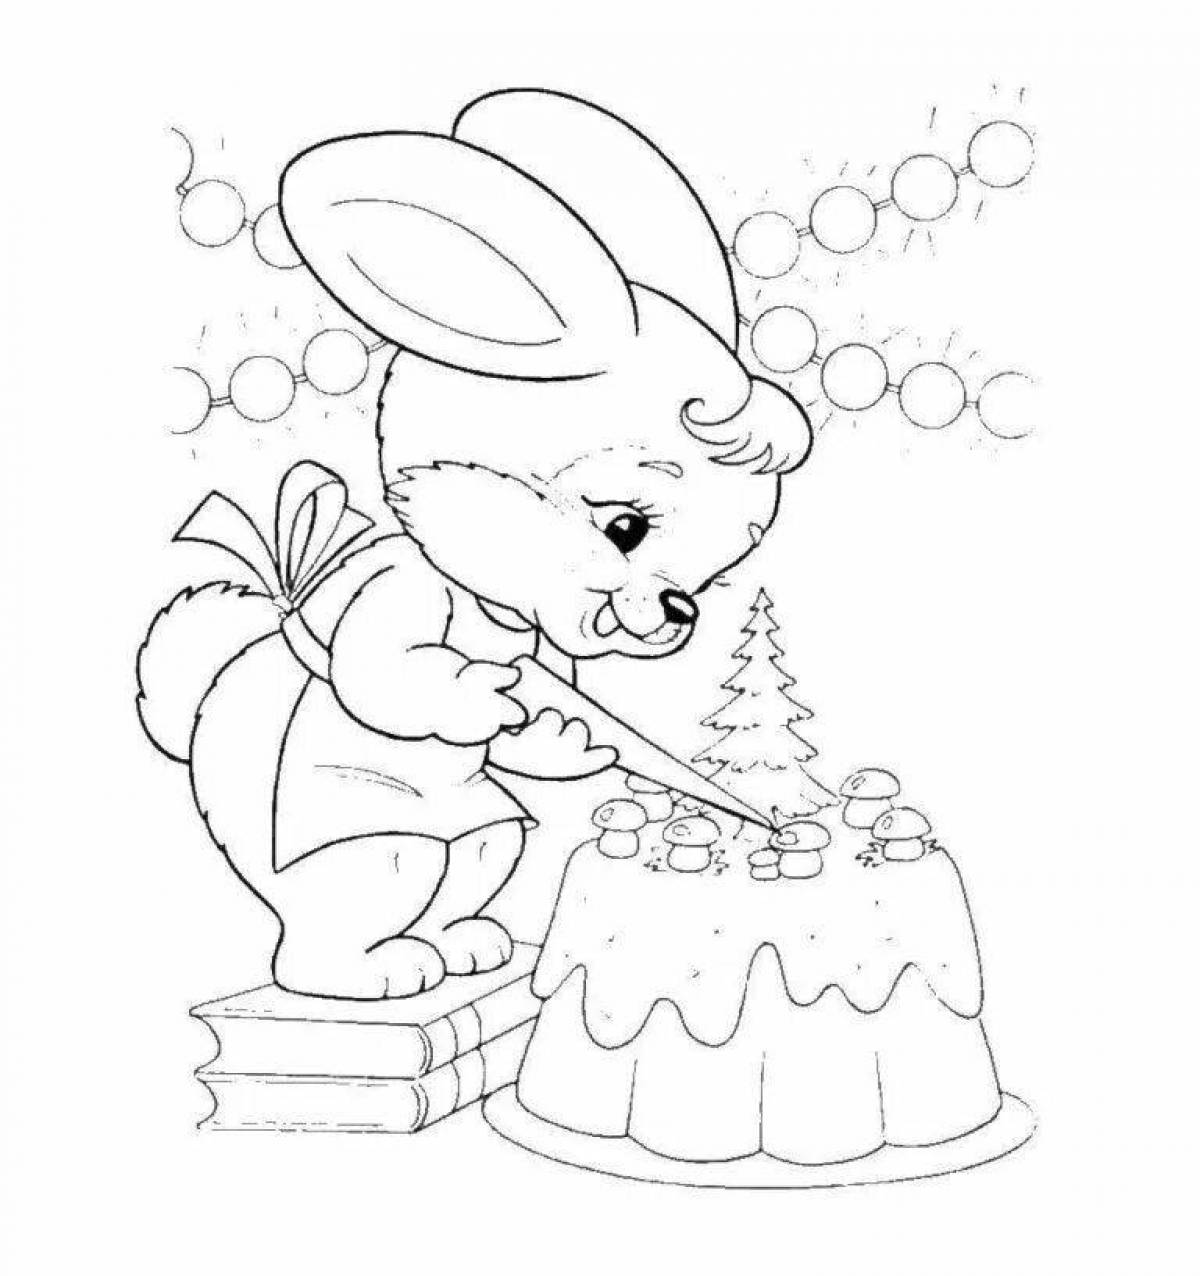 Exquisite new coloring pages